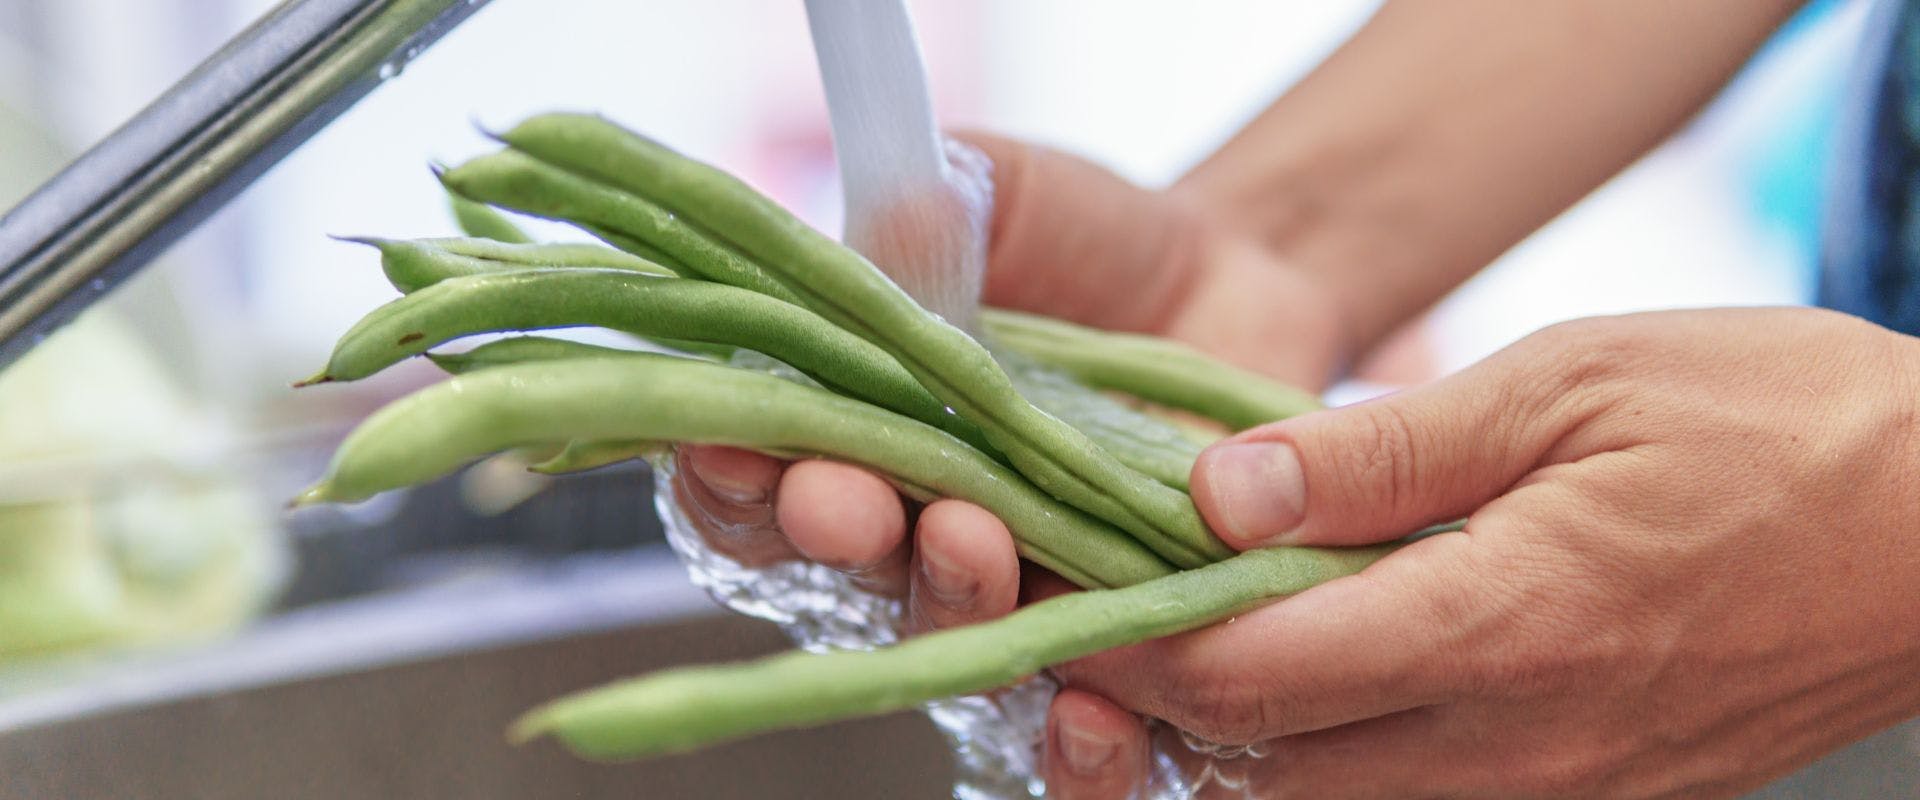 Person washing green beans